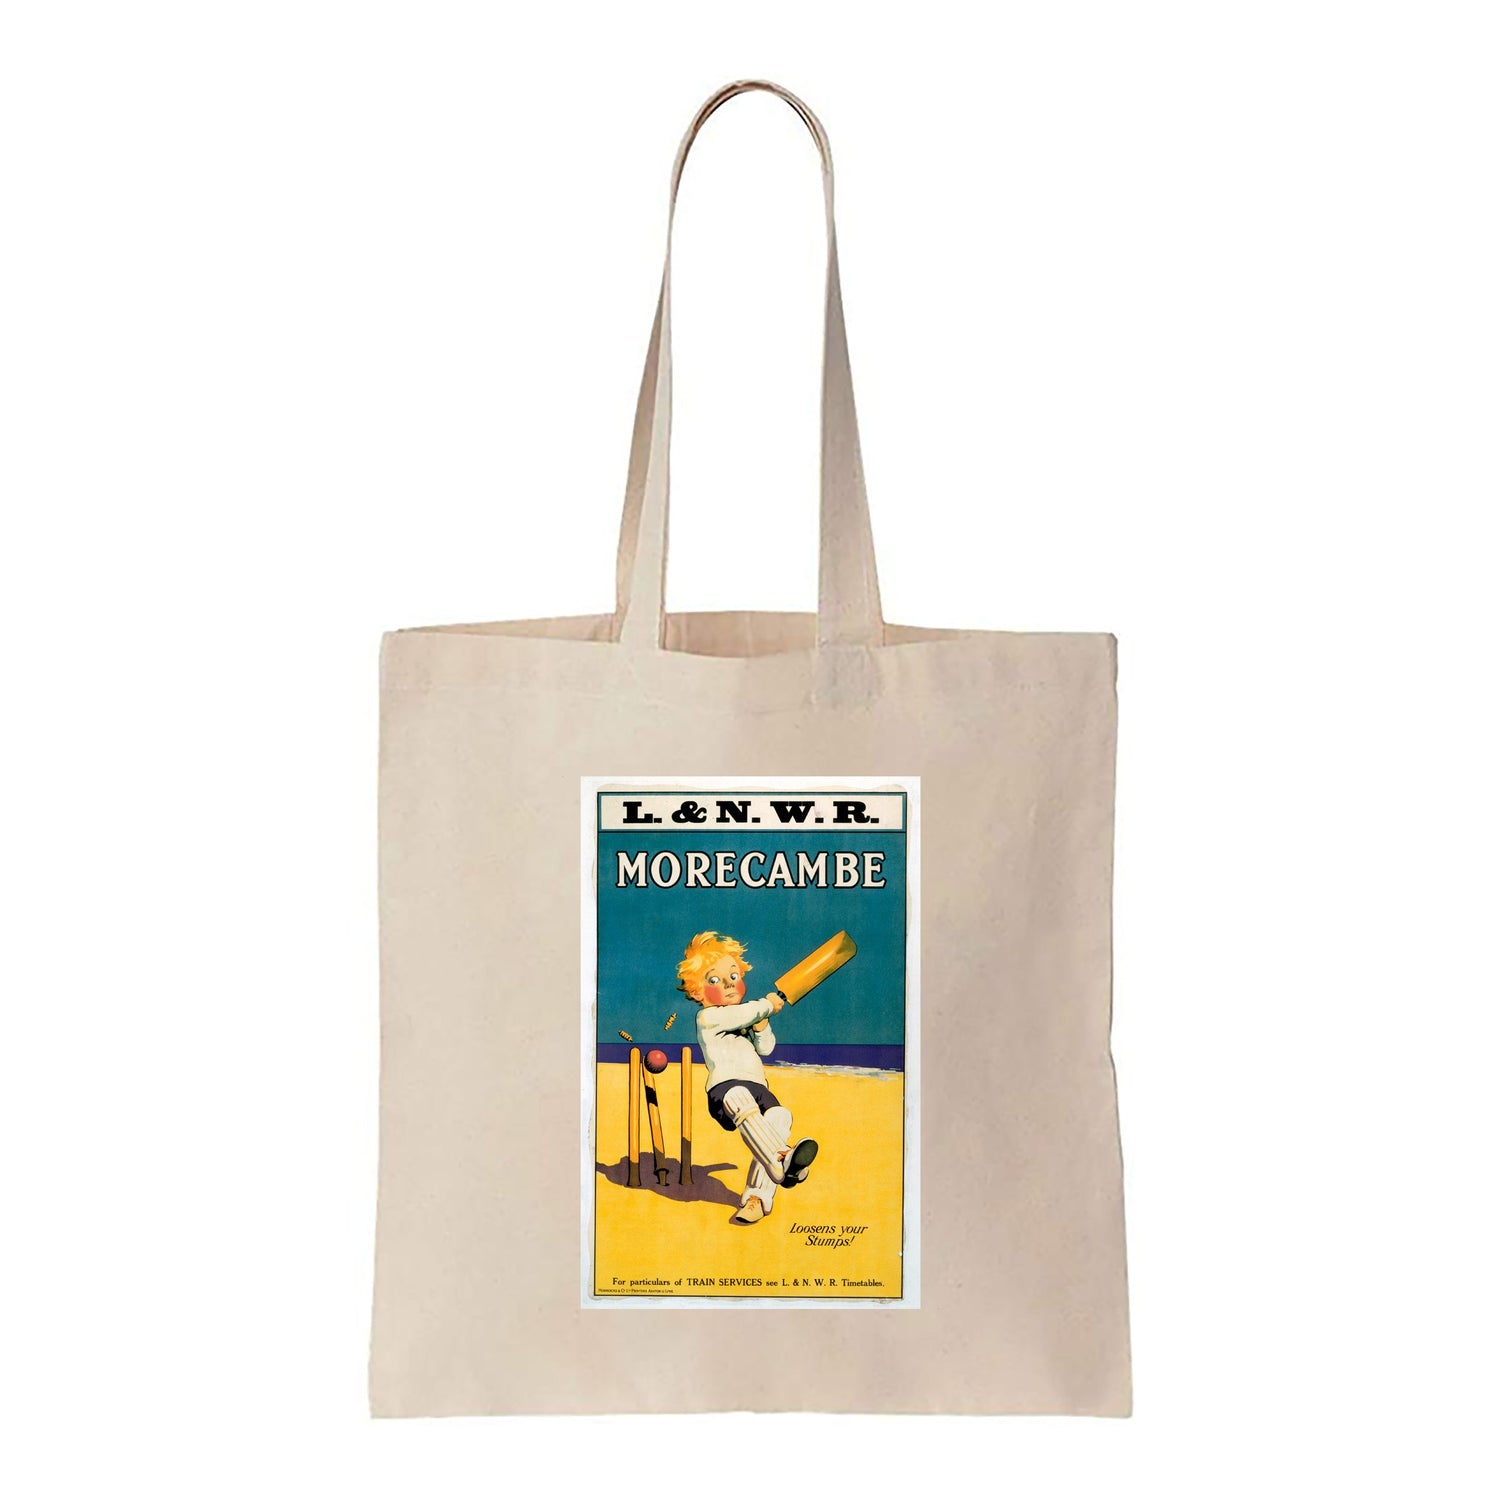 Morecambe - Loosens your stumps - Canvas Tote Bag